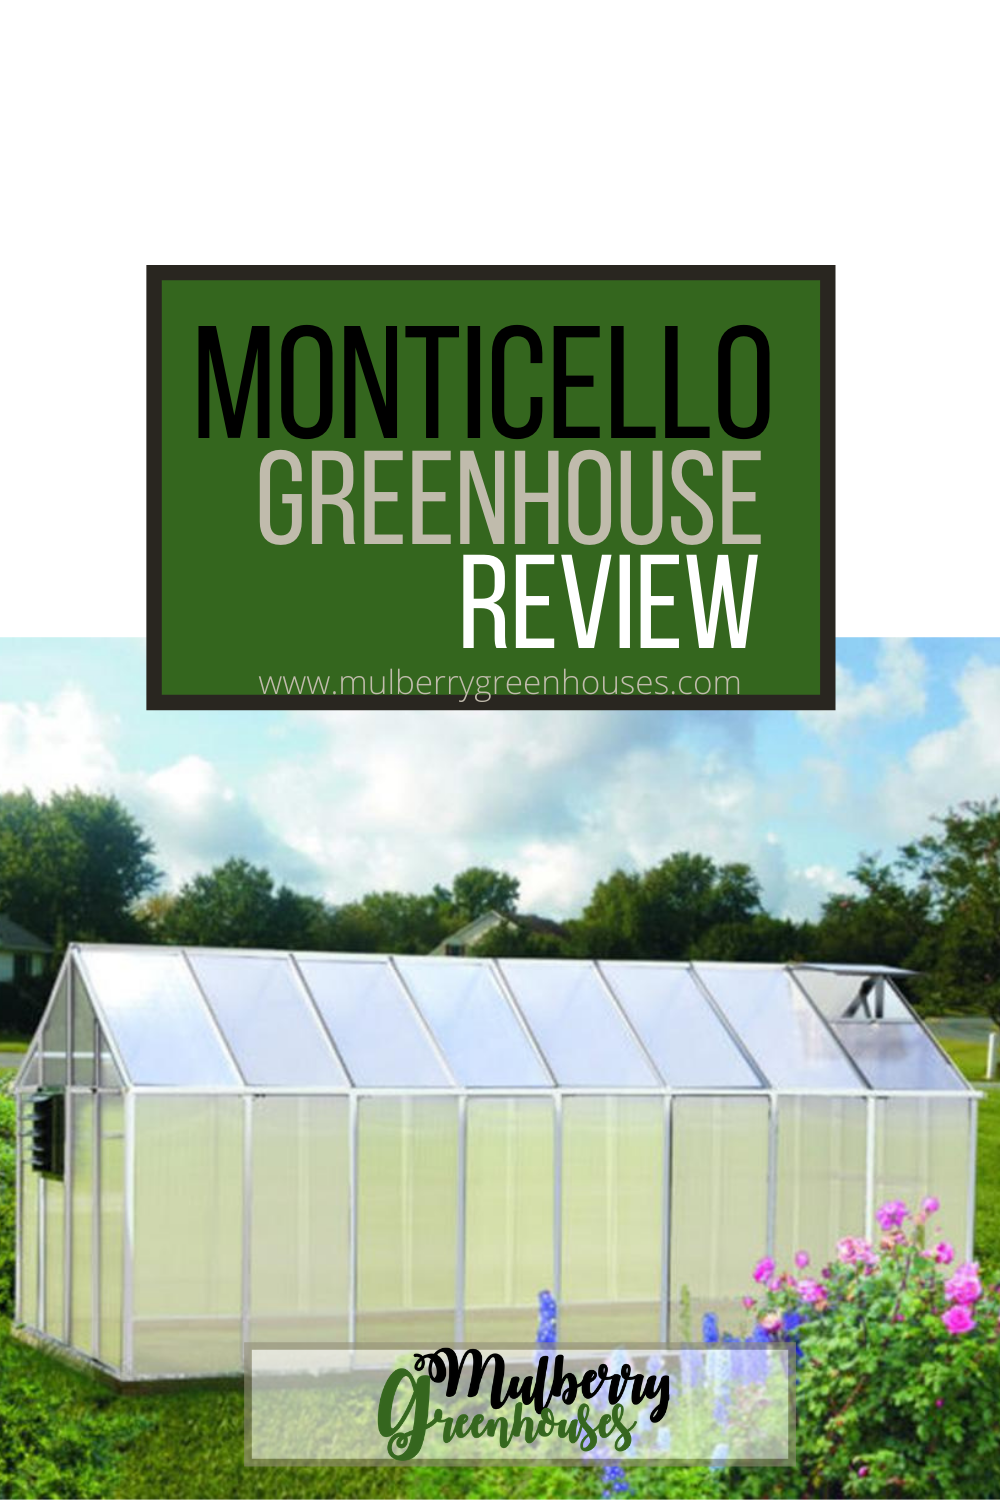 Monticello Greenhouse Review